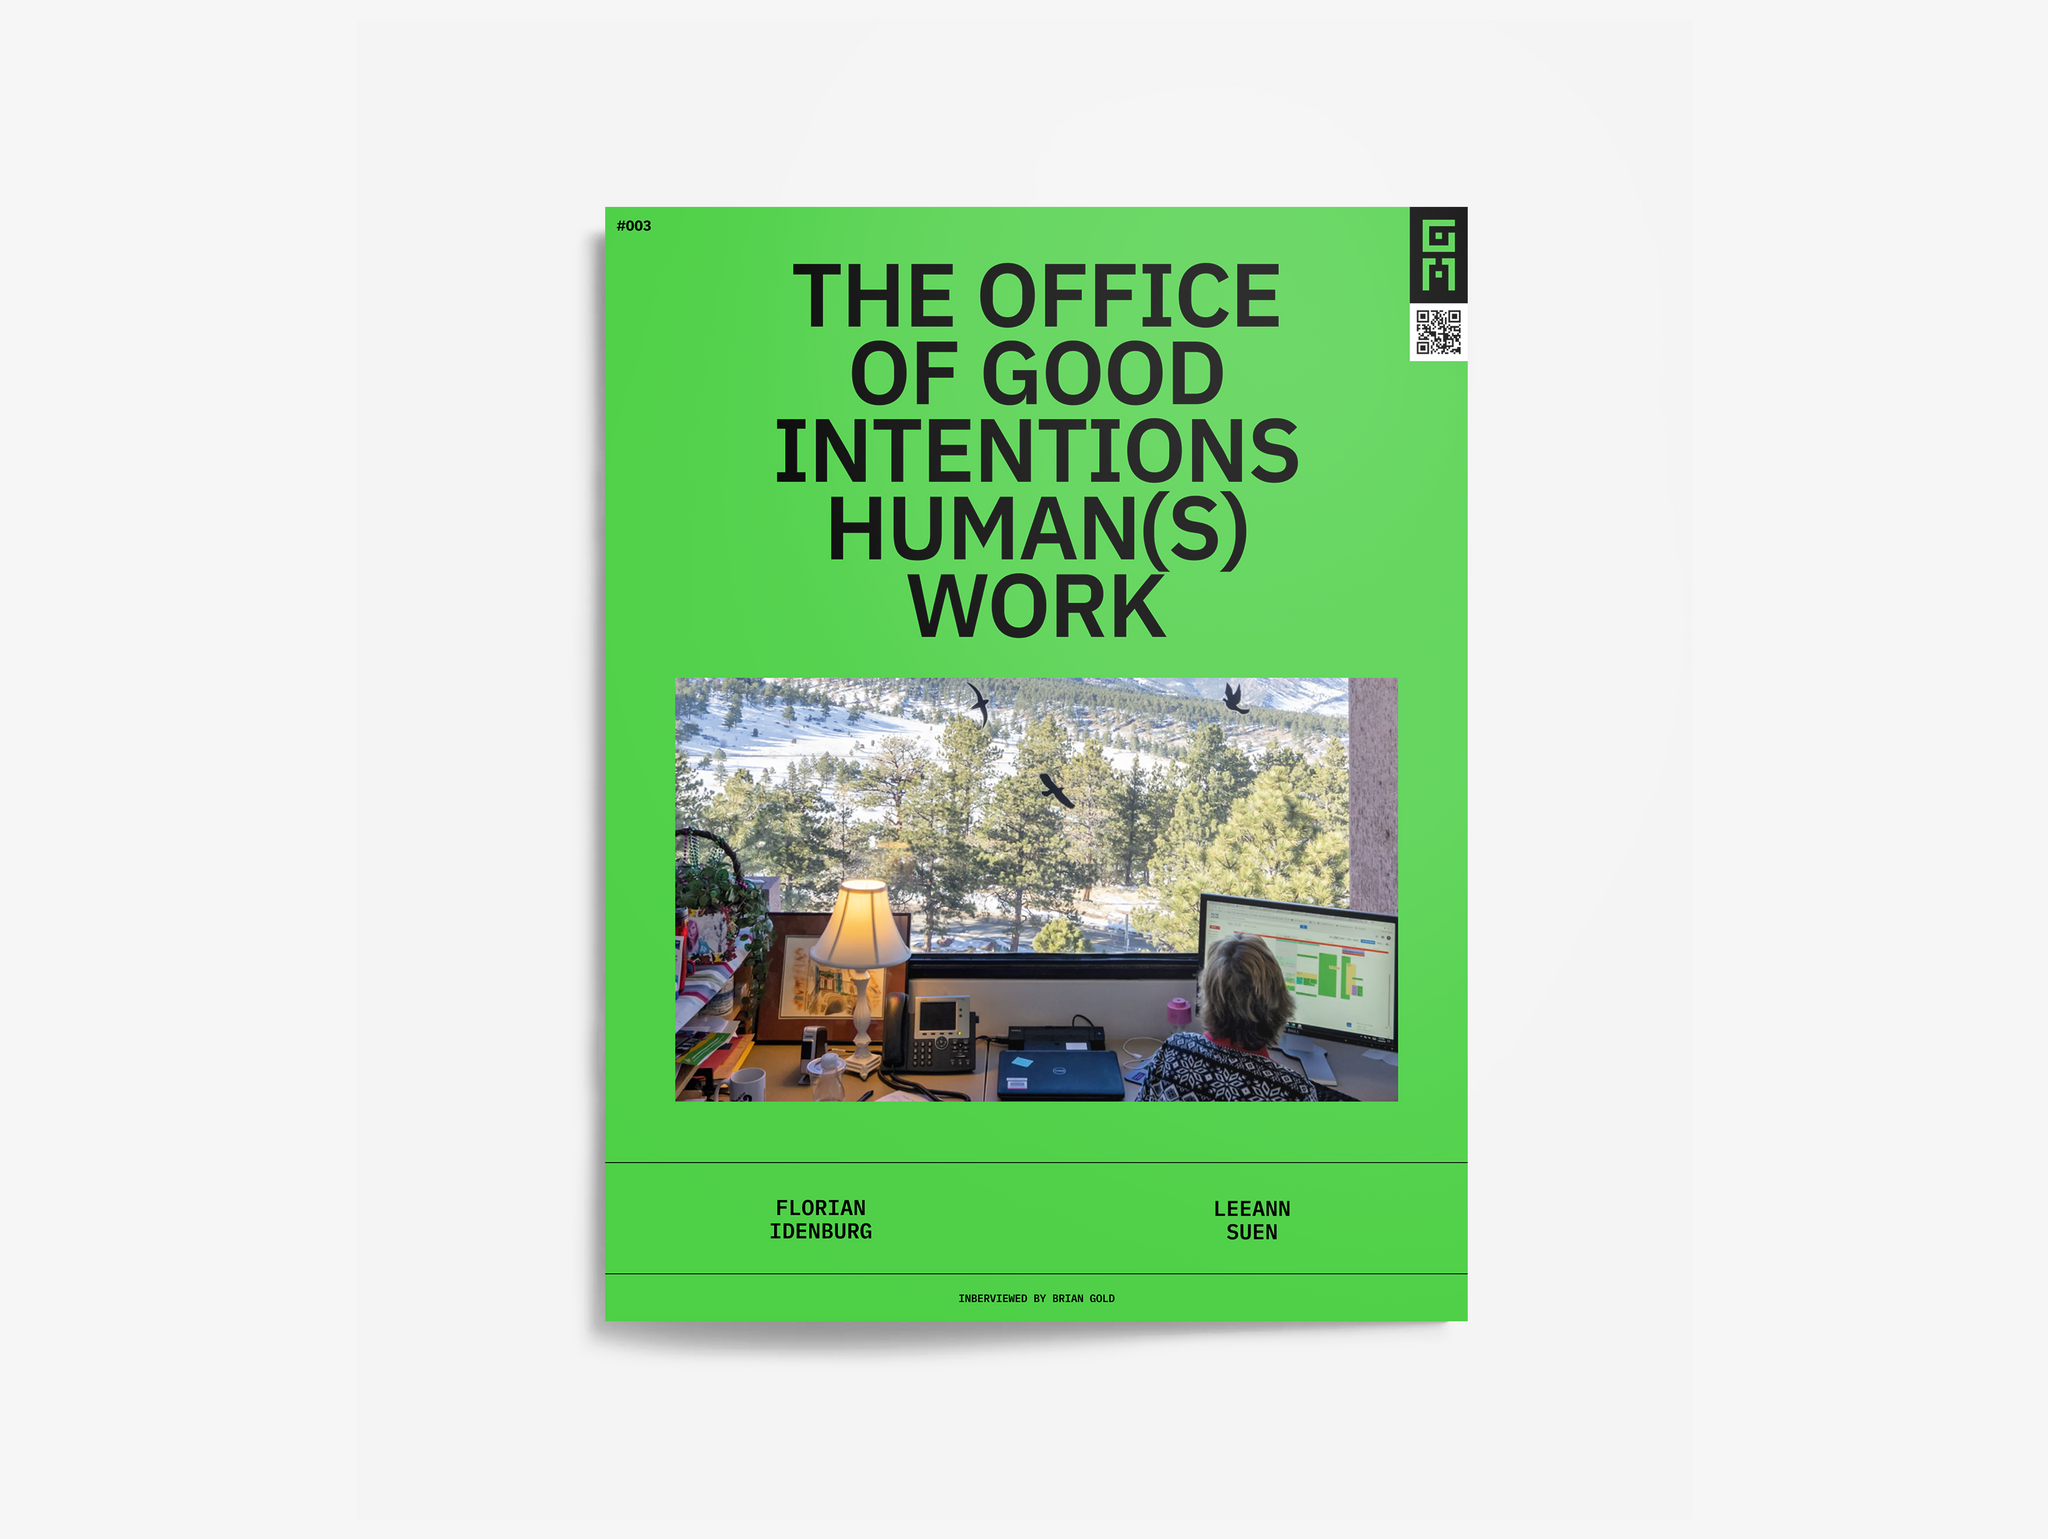 Episode 002: The Office of Good Intentions: Human(s) Work